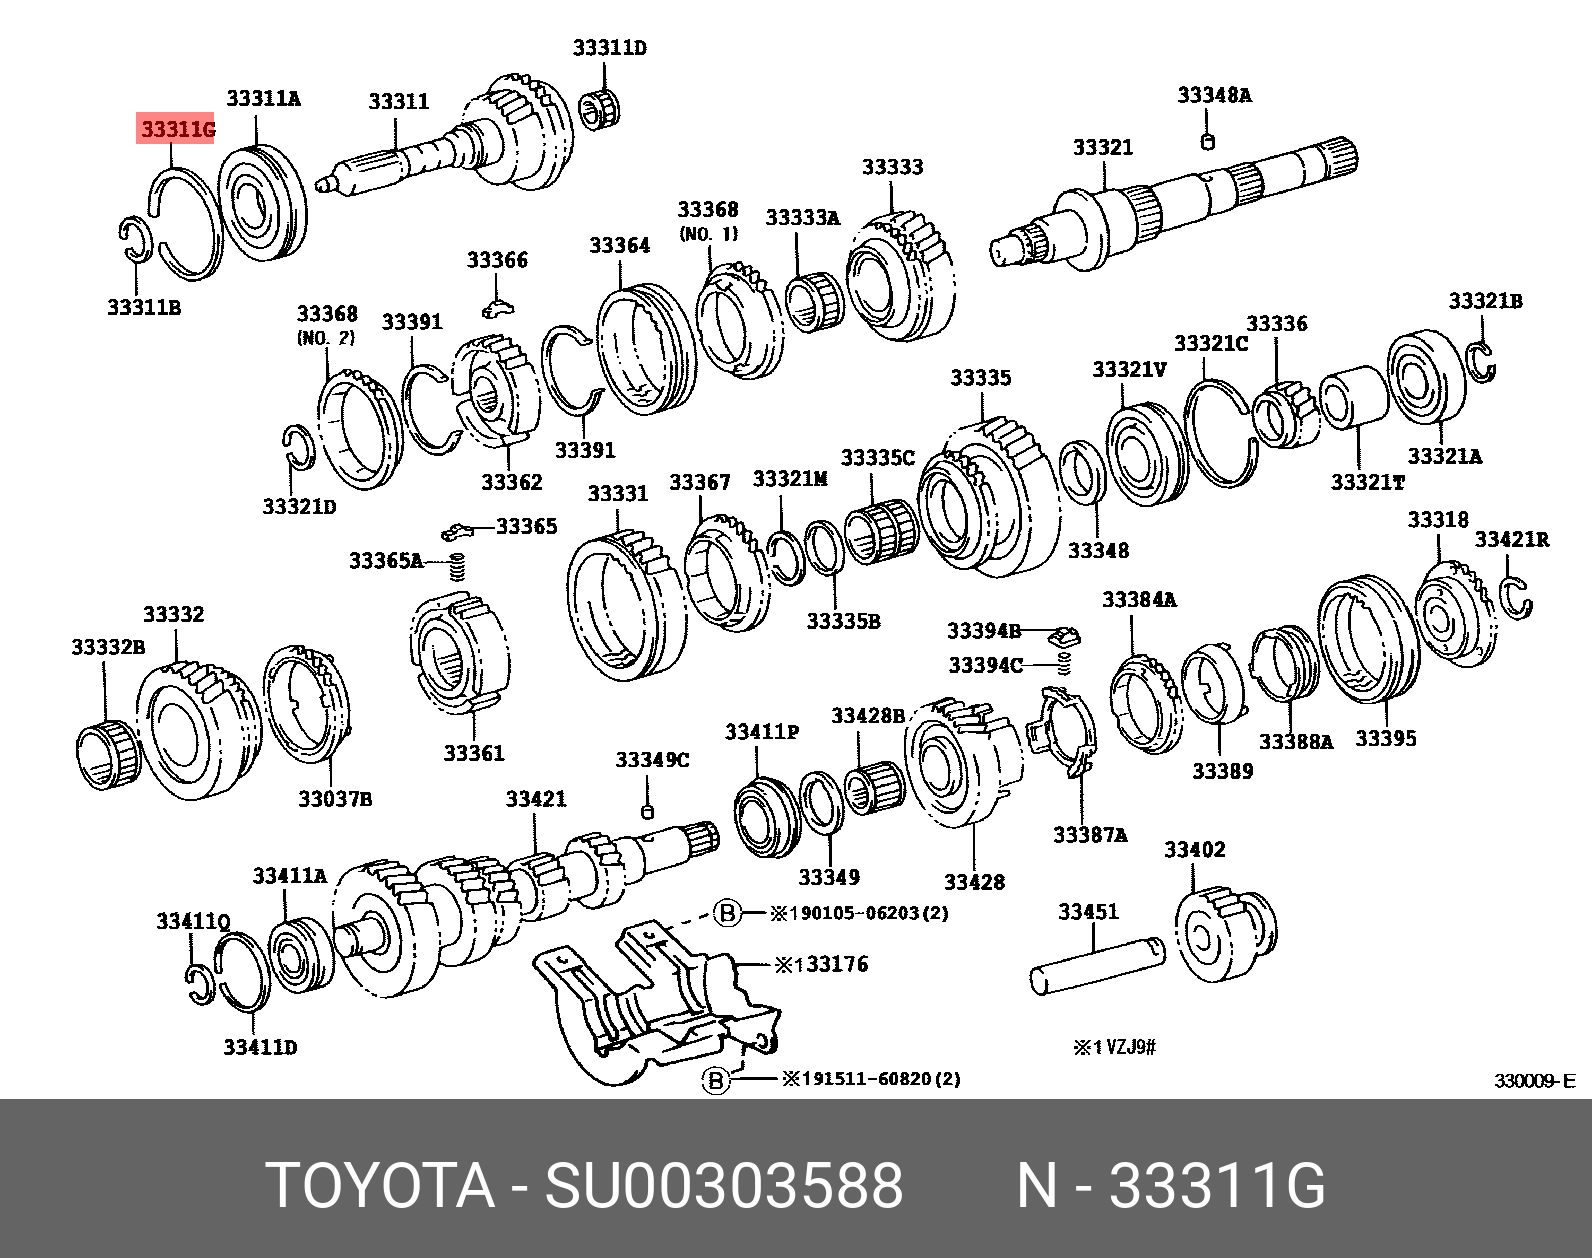 86 201608-, RING, SHAFT SNAP (FOR FRONT BEARING)